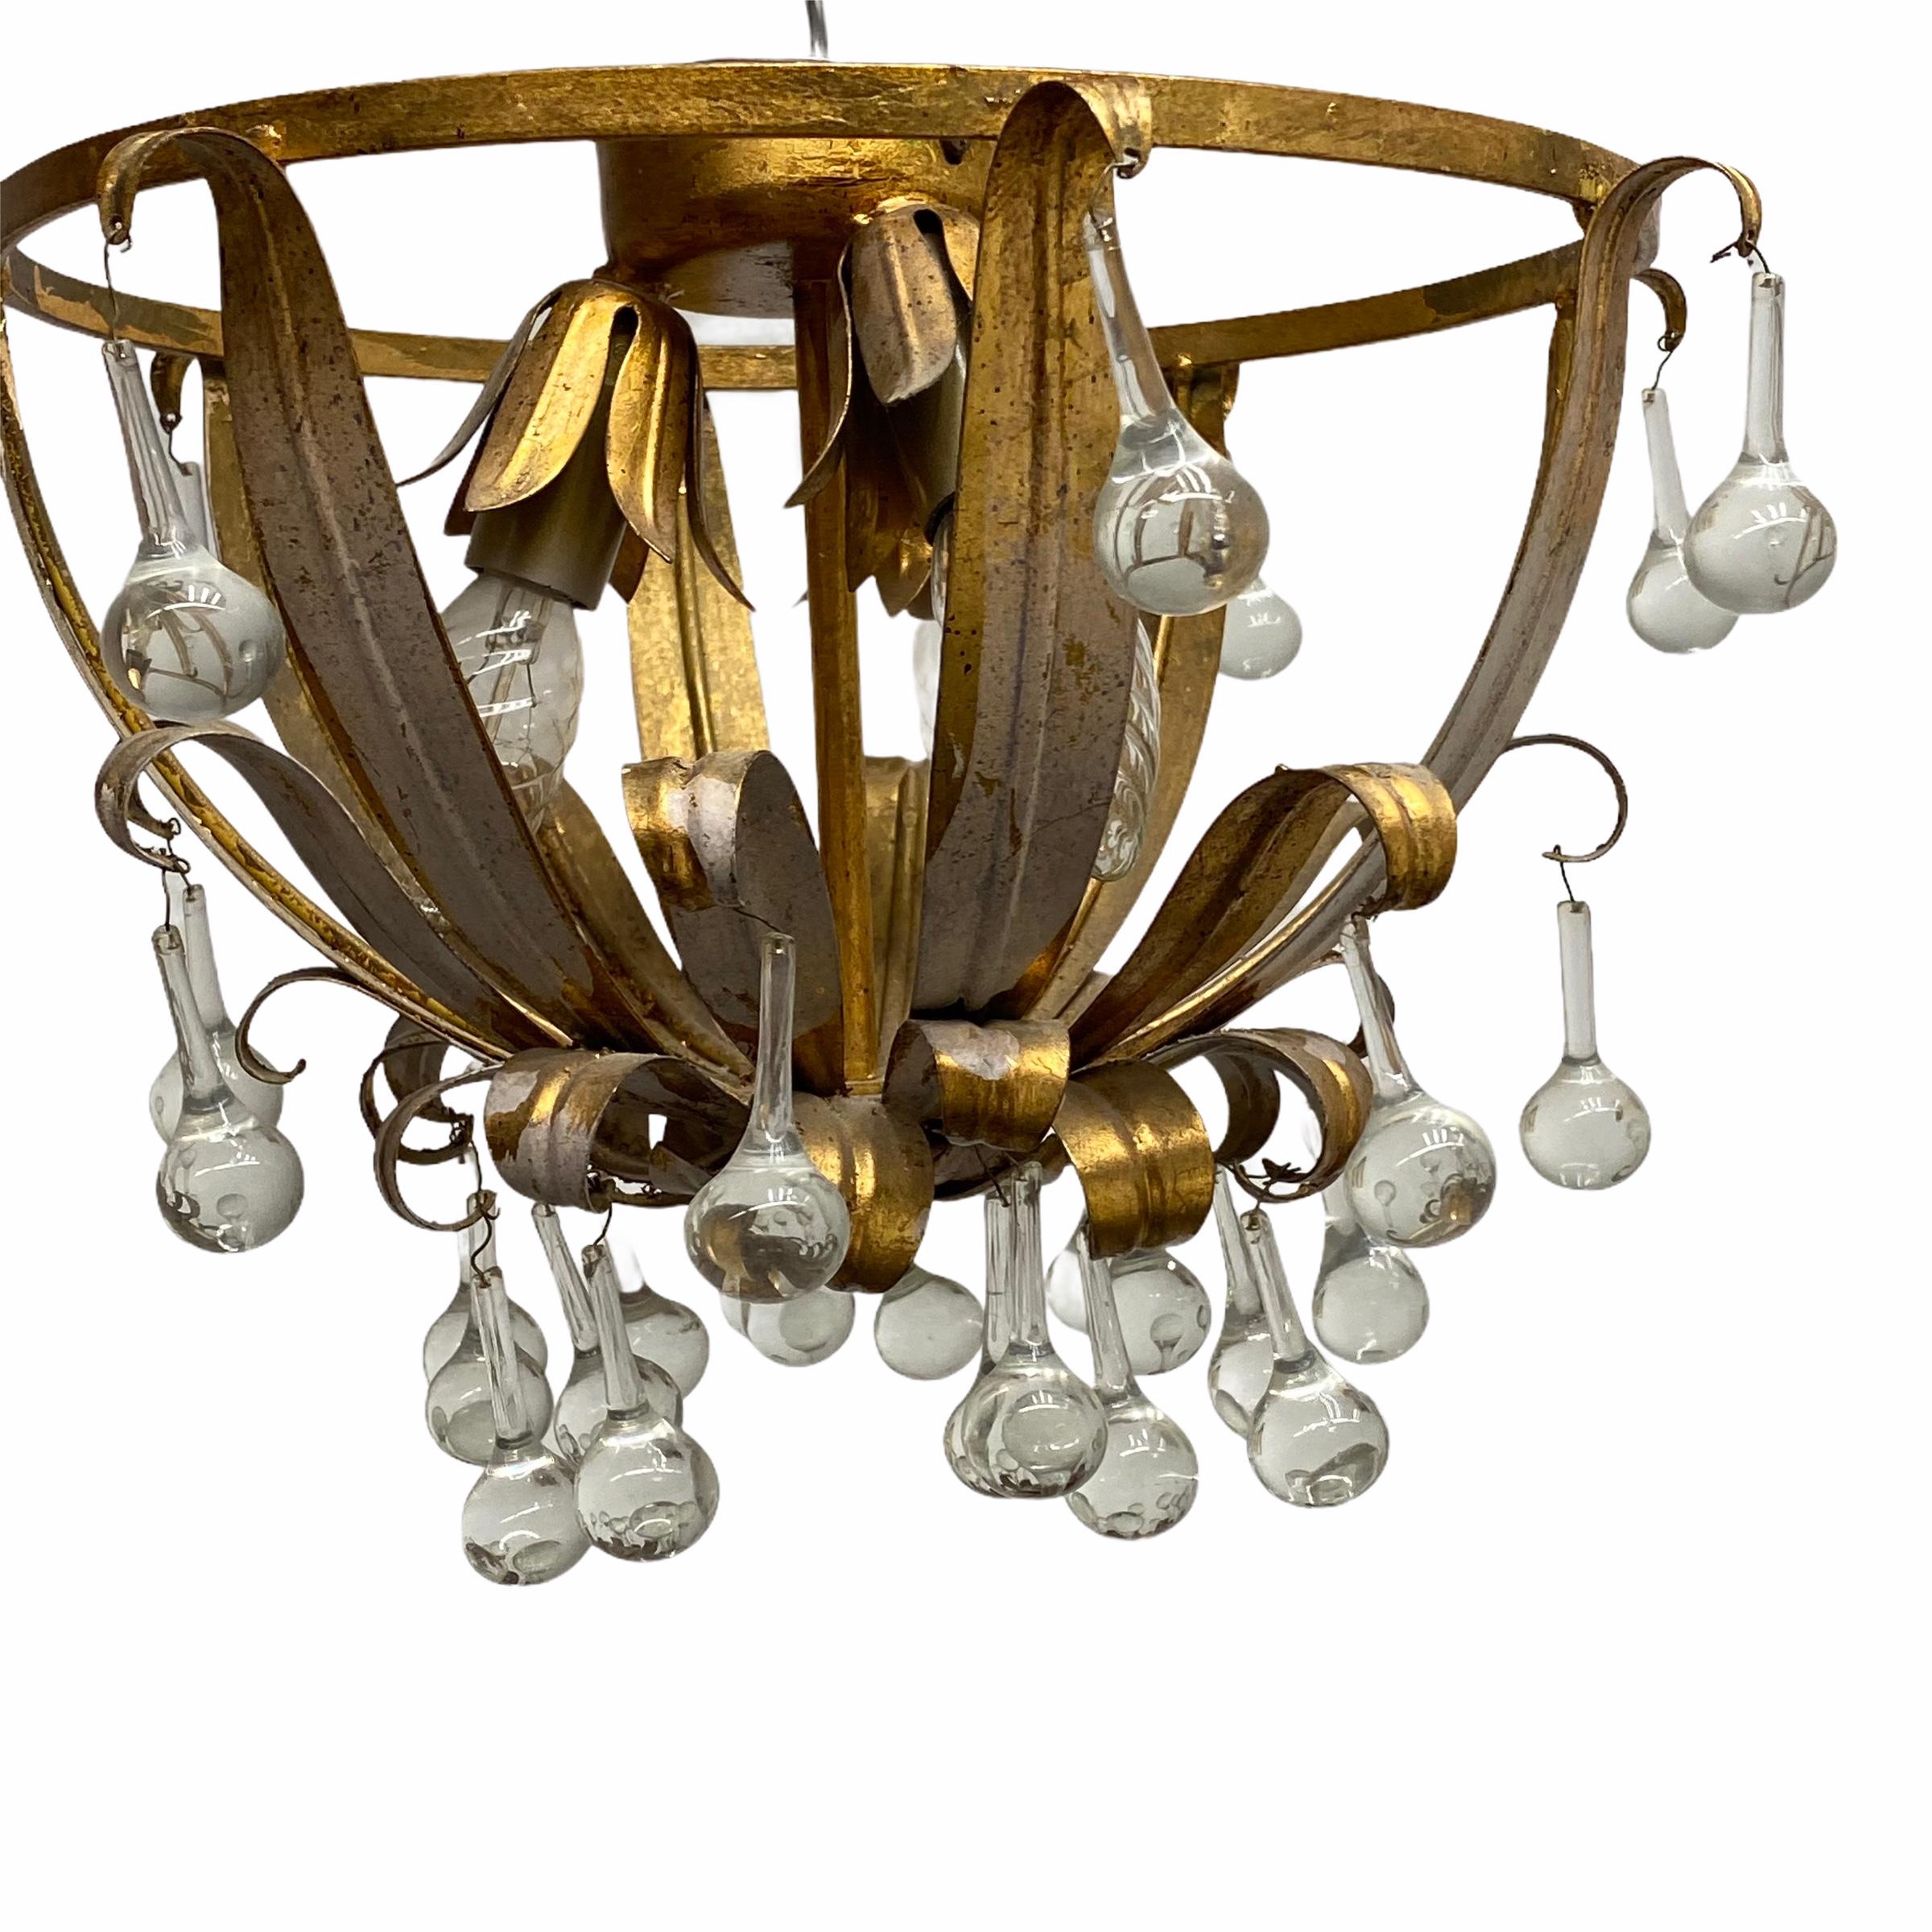 Add a touch of opulence to your home with this charming flush mount light. Perfect gilt metal leafs to enhance any chic or eclectic home. We'd love to see it hanging in an entryway as a charming welcome home. Built in the 1960s, made by Koegl